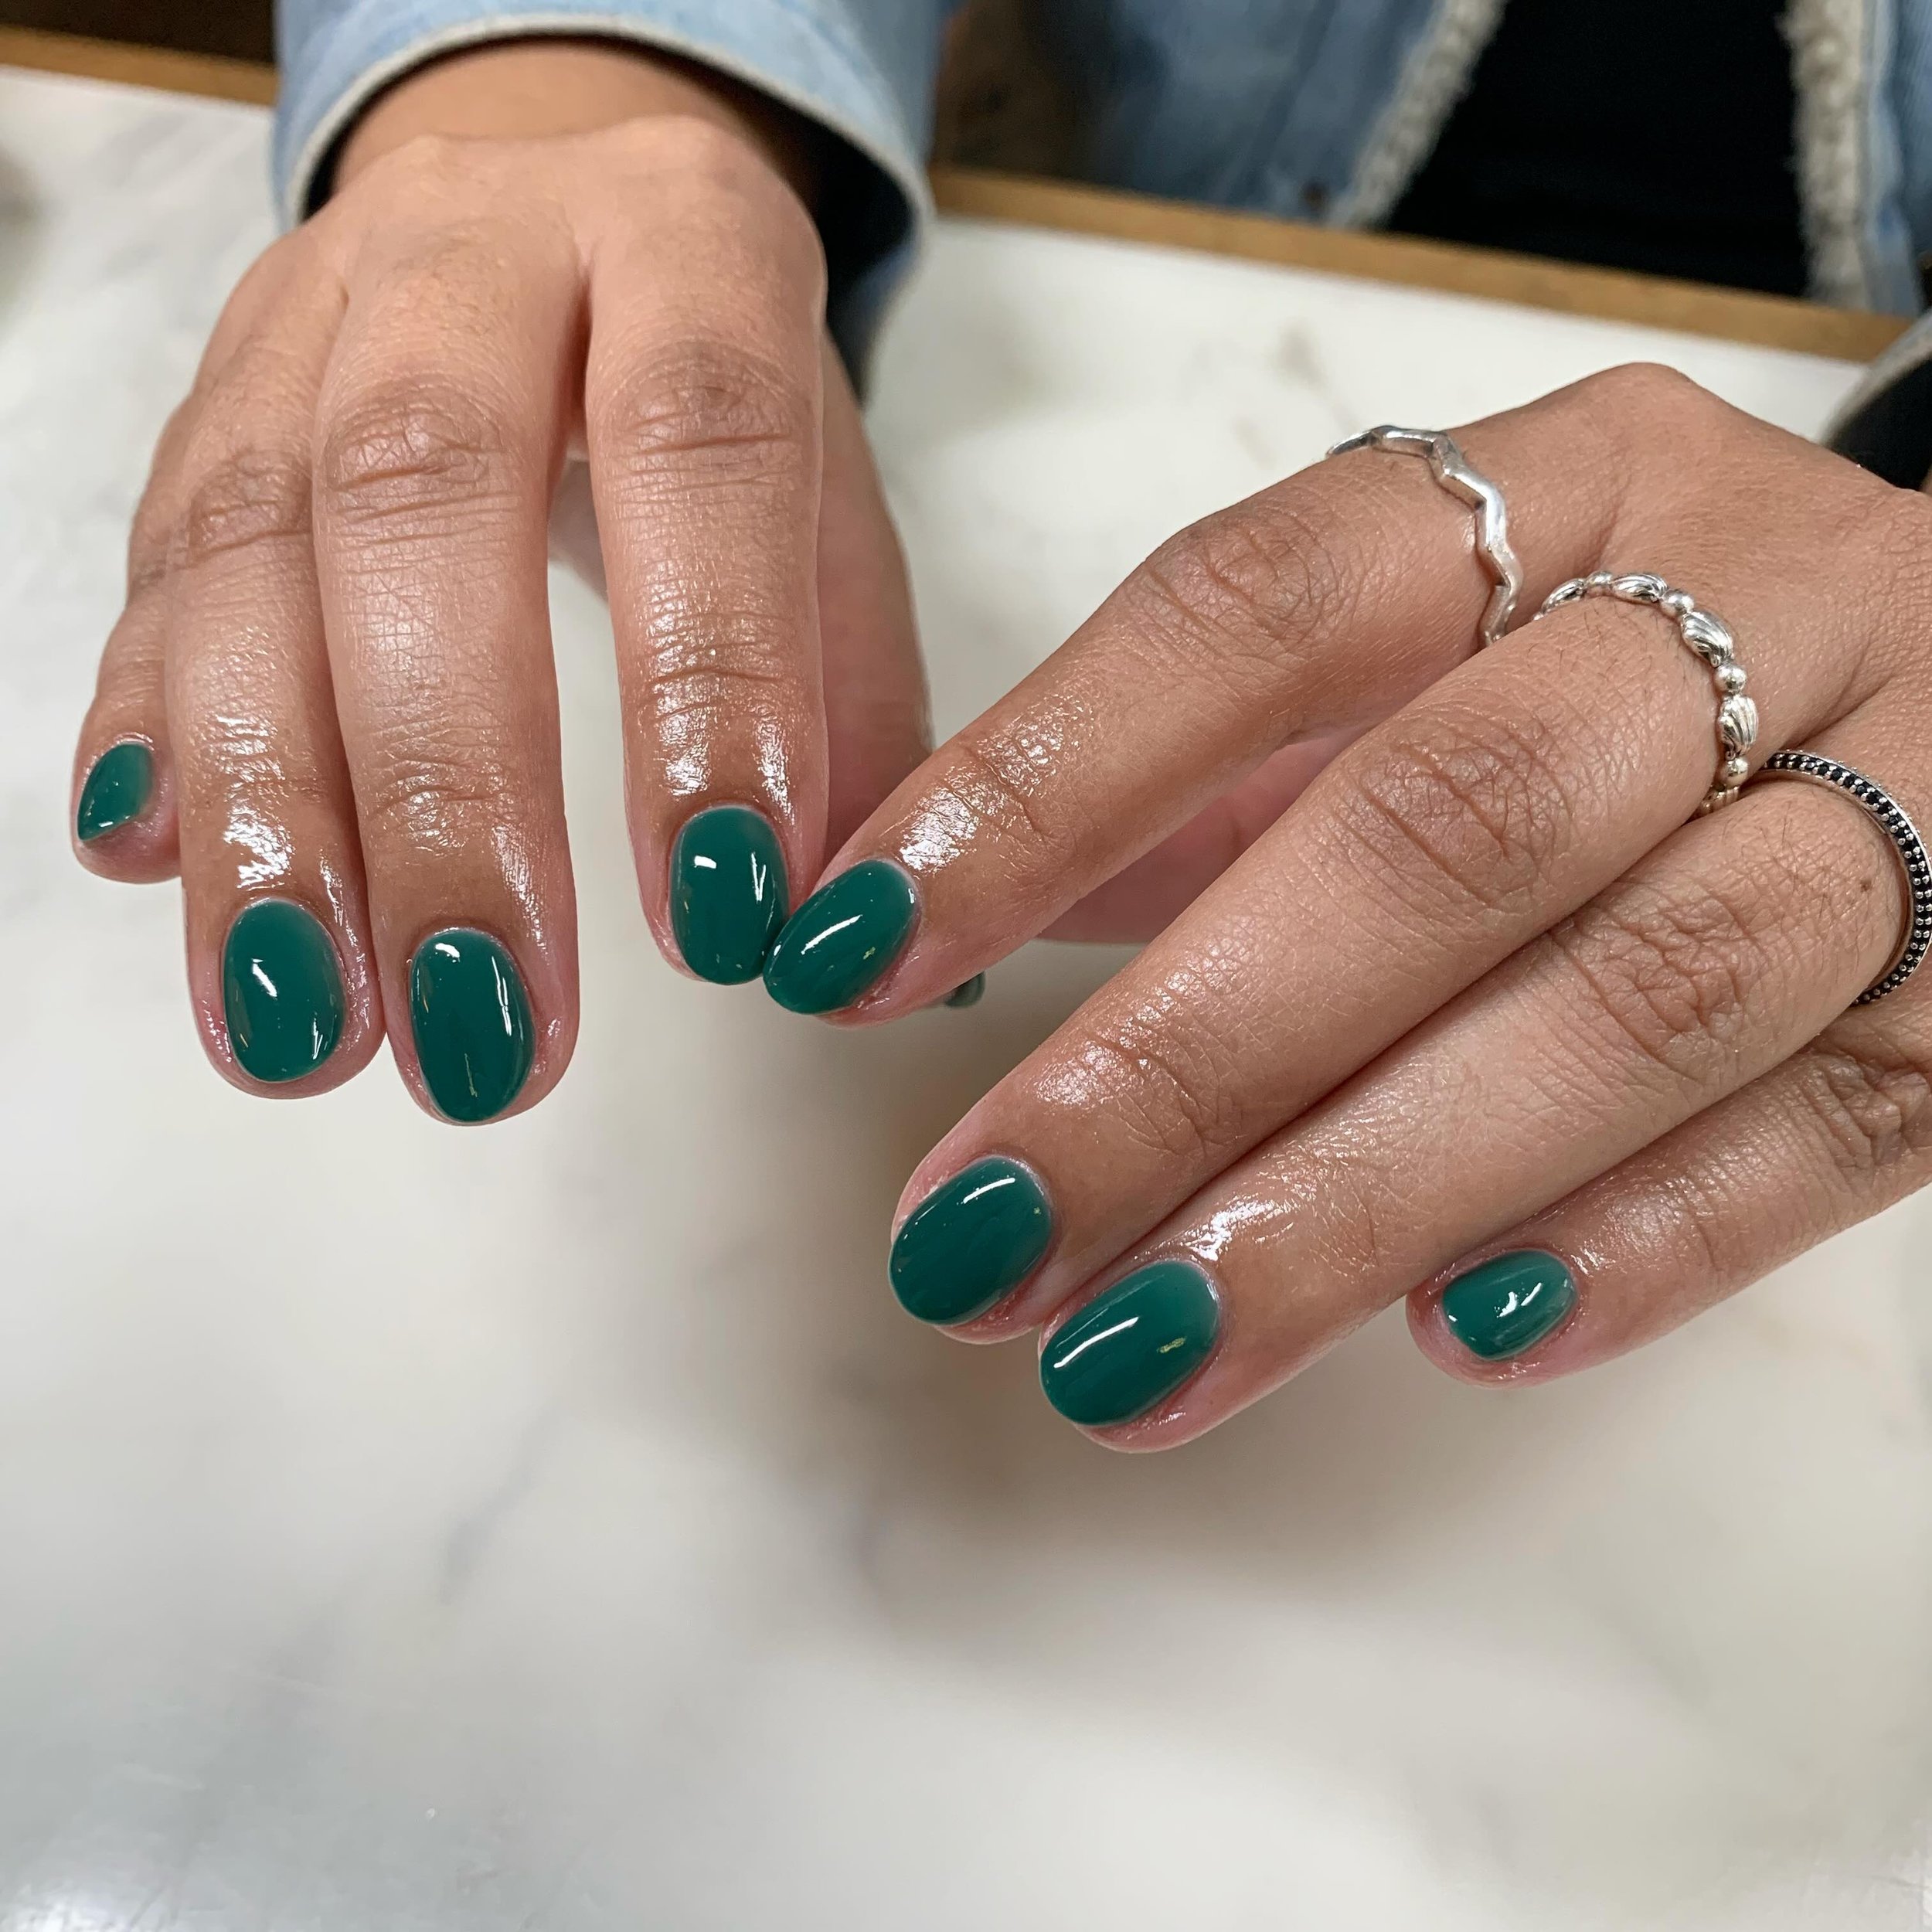 Beautiful green bio gel manicure by Hitomi 🍃 few appointments available this week! Transform your nails with us now 💅🏻#biosculpturegel#biosculpturegelnails#bestnailsinmelbourne